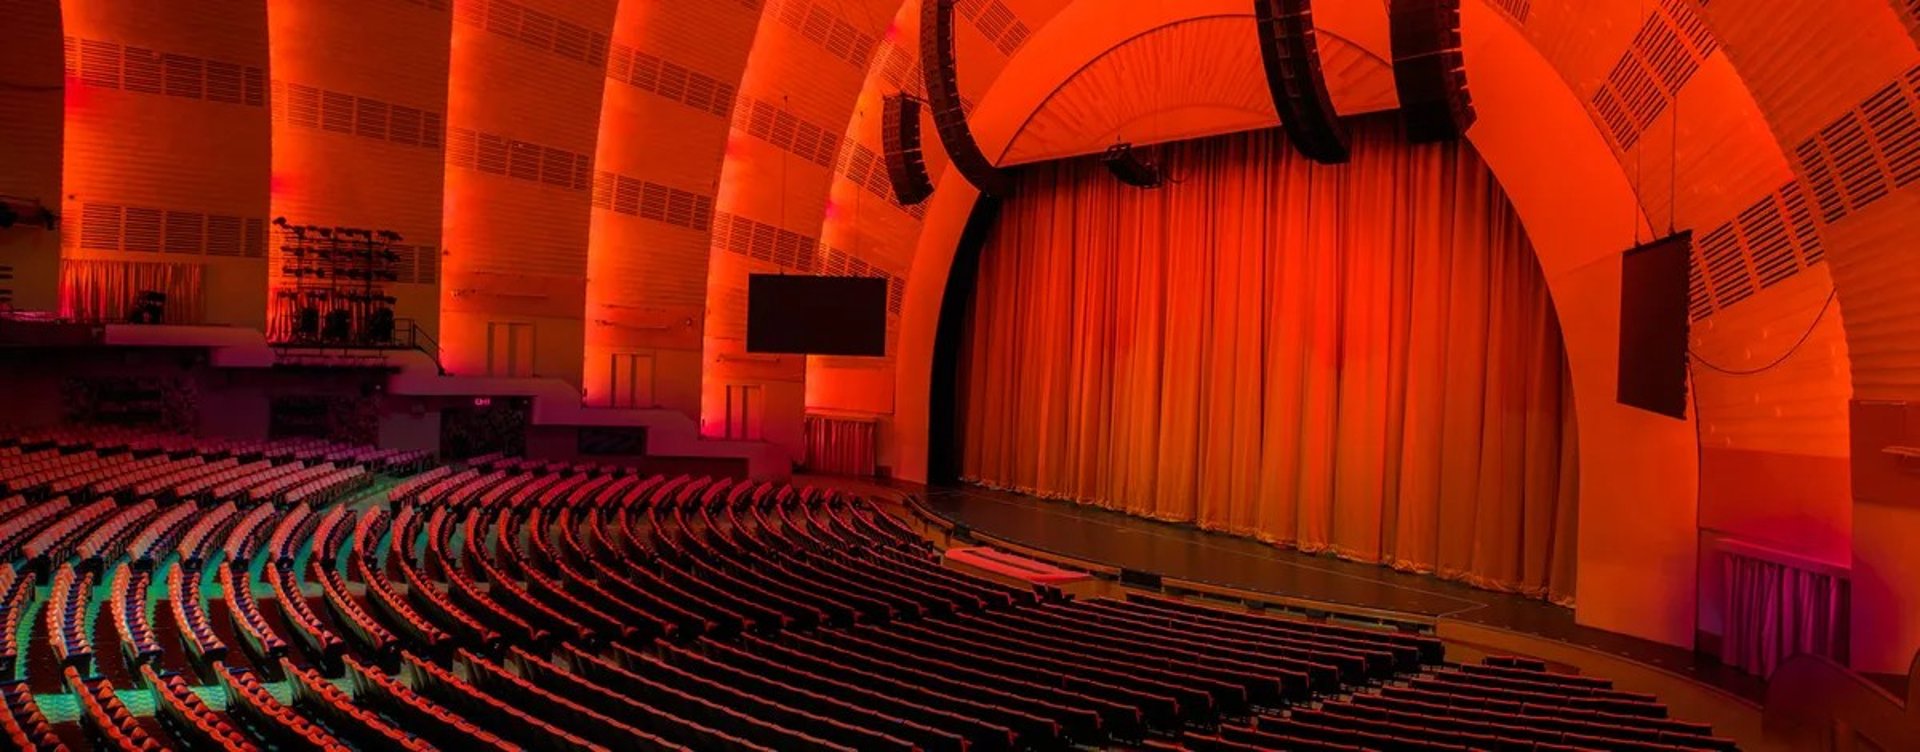 Radio City Music Hall - Performance Space in New York, NY | The Vendry